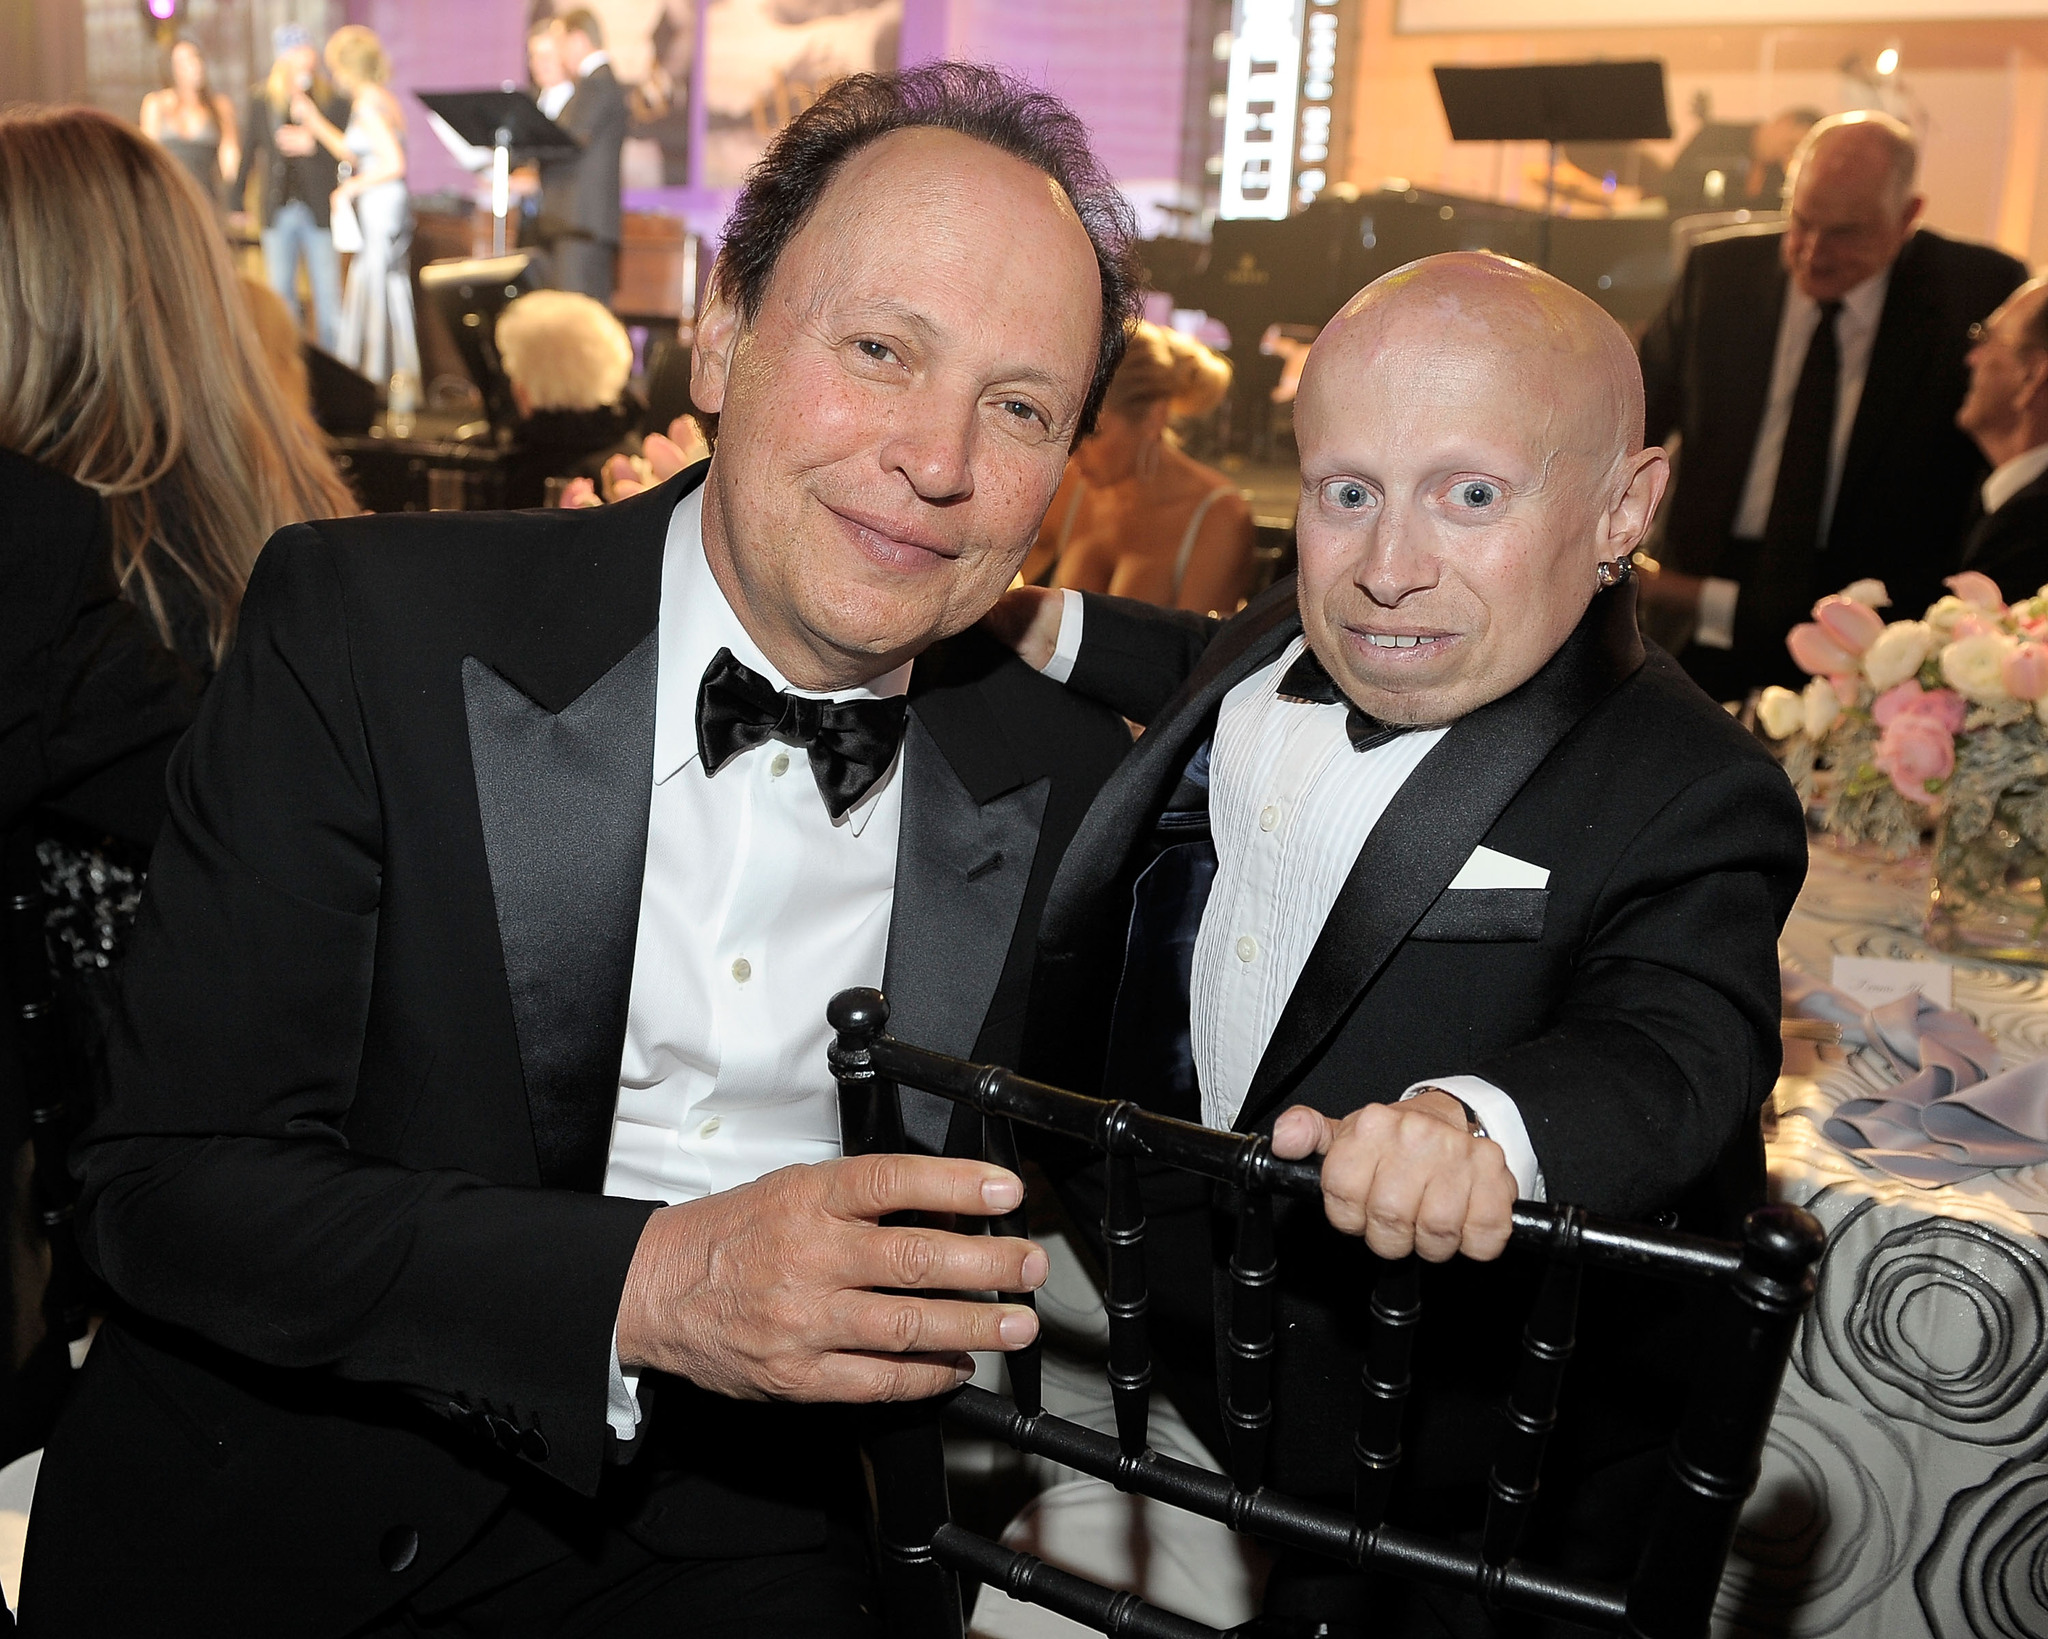 Billy Crystal and Verne Troyer